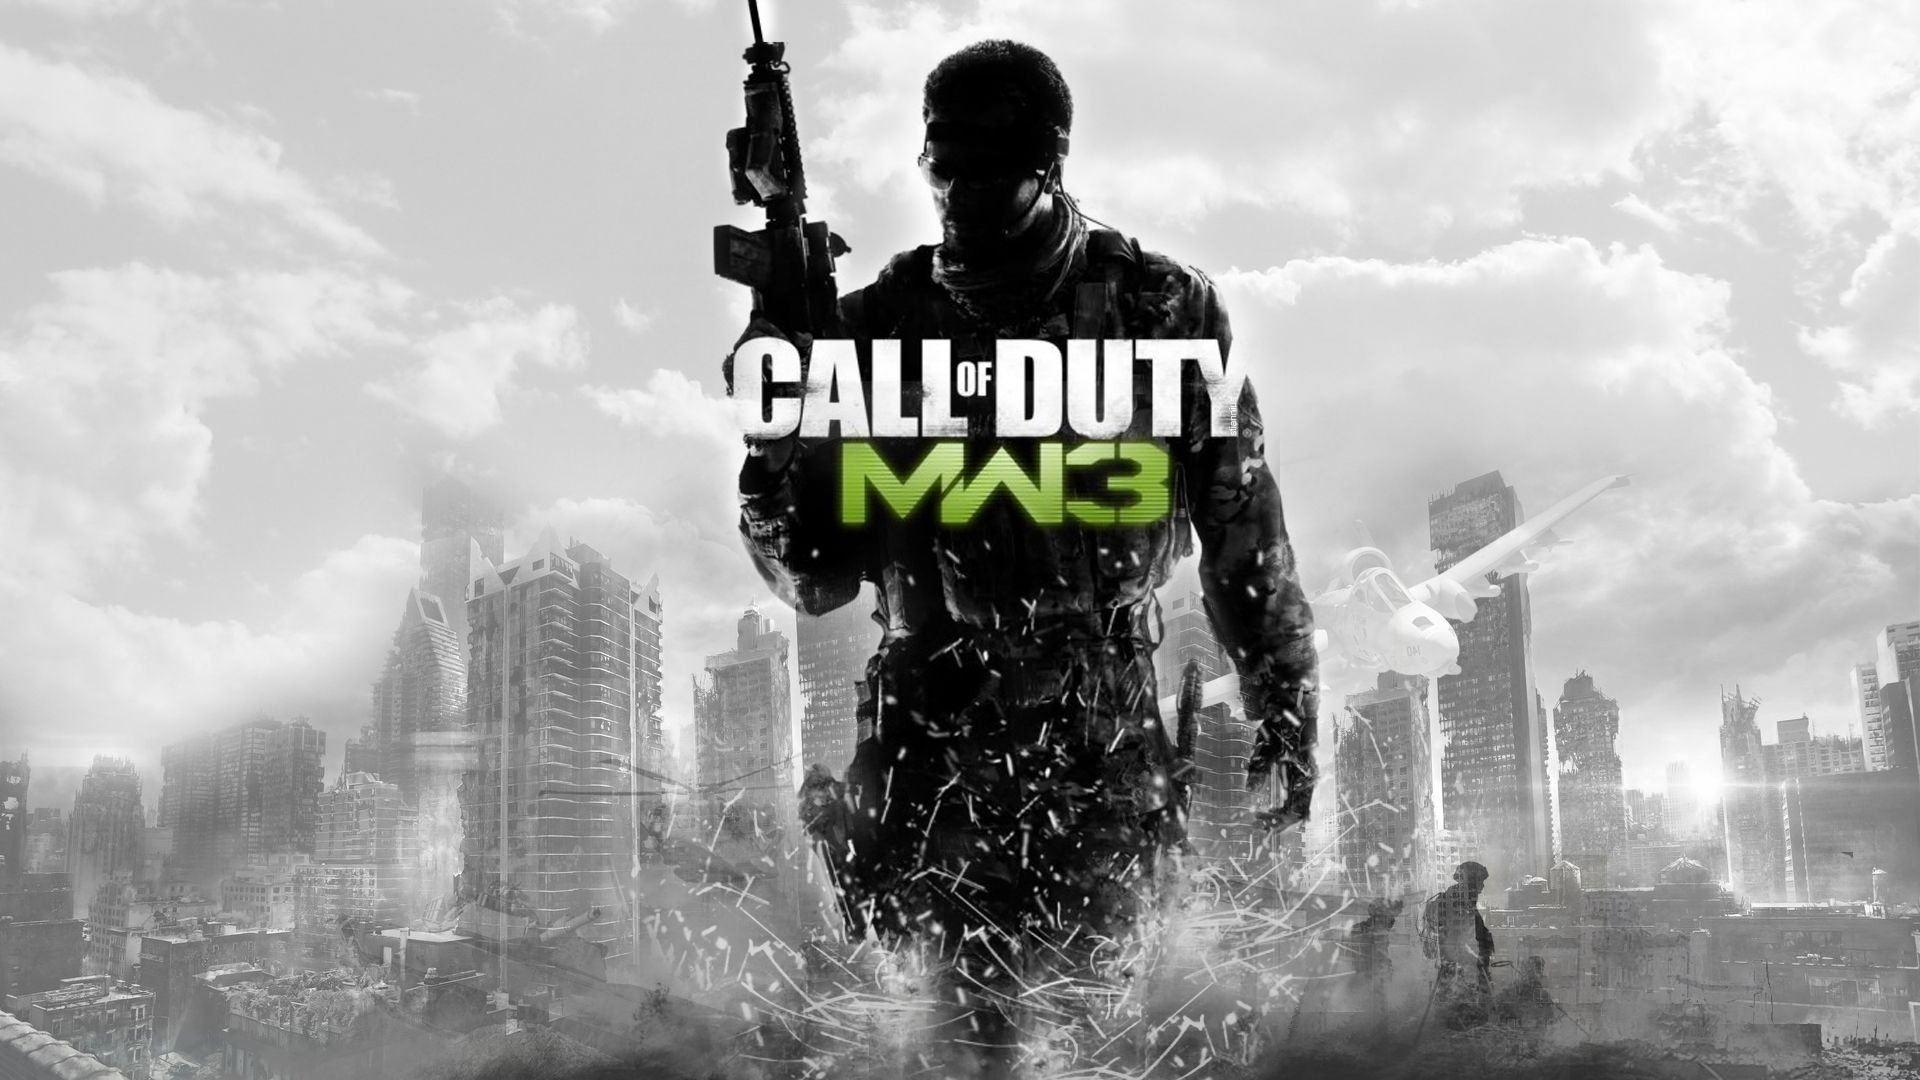 Heroic soldier in action, battling enemies in the intense world of Call of Duty: Modern Warfare 3.